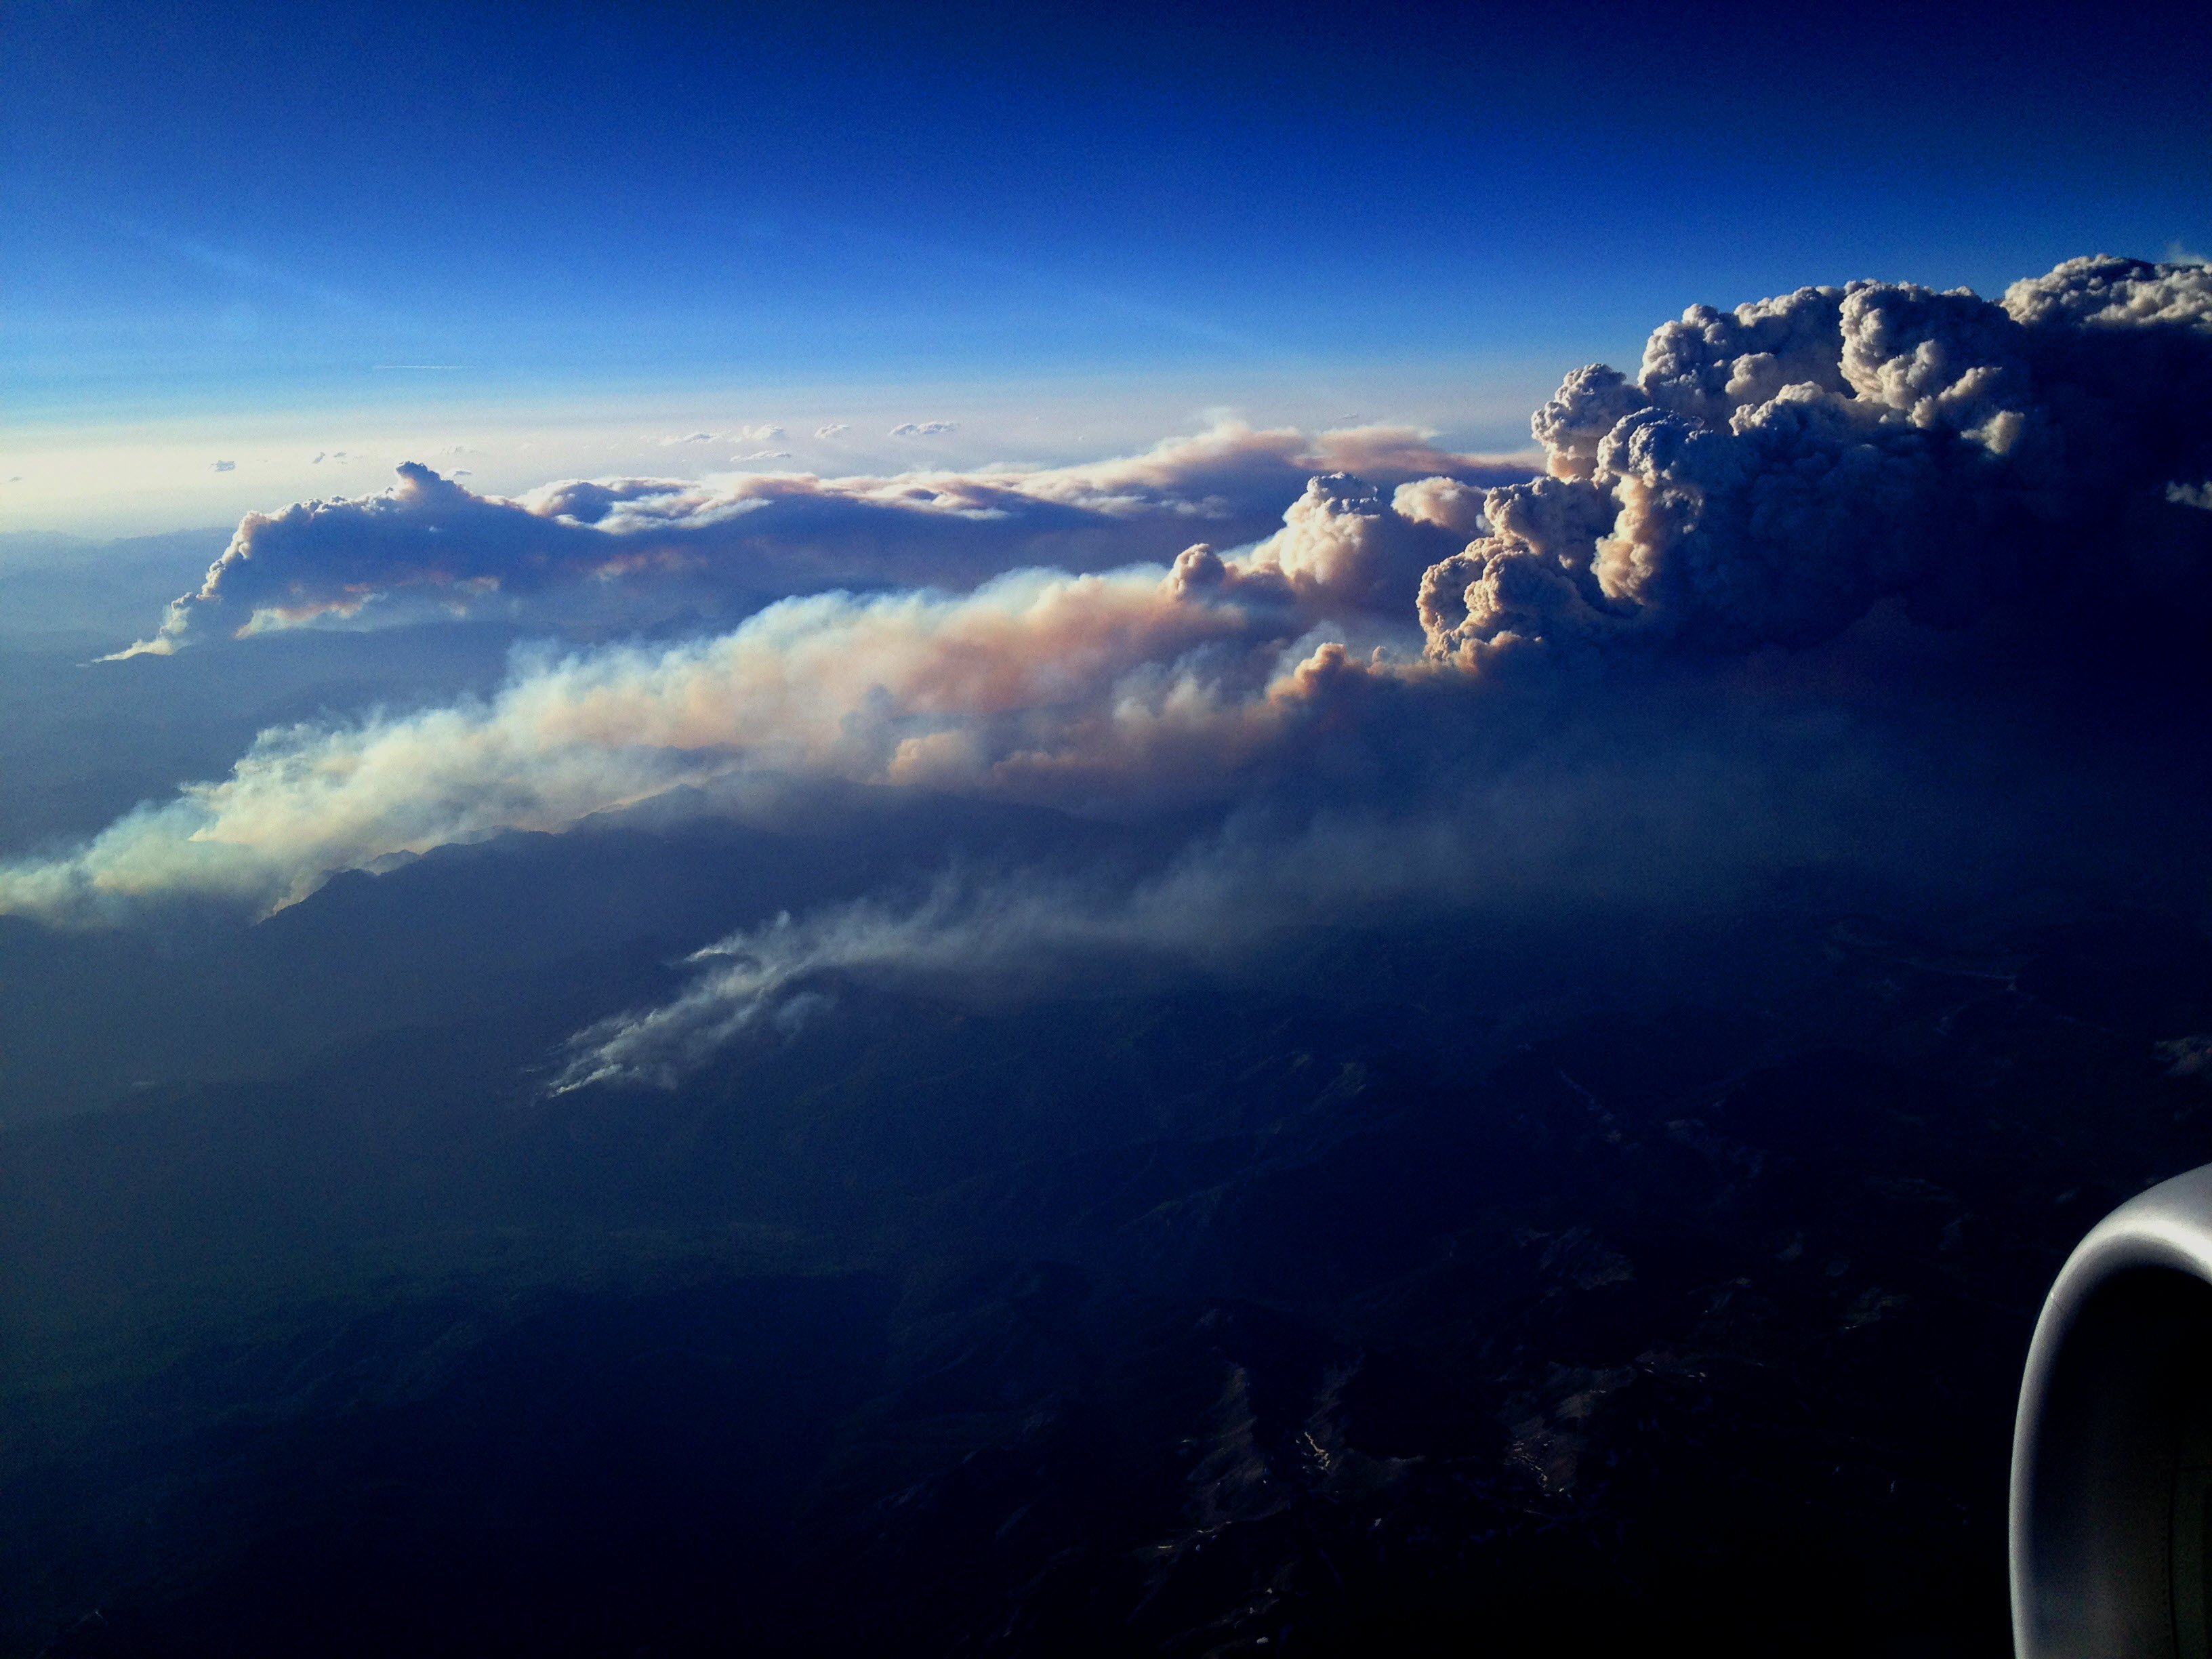 West fork fire from the air